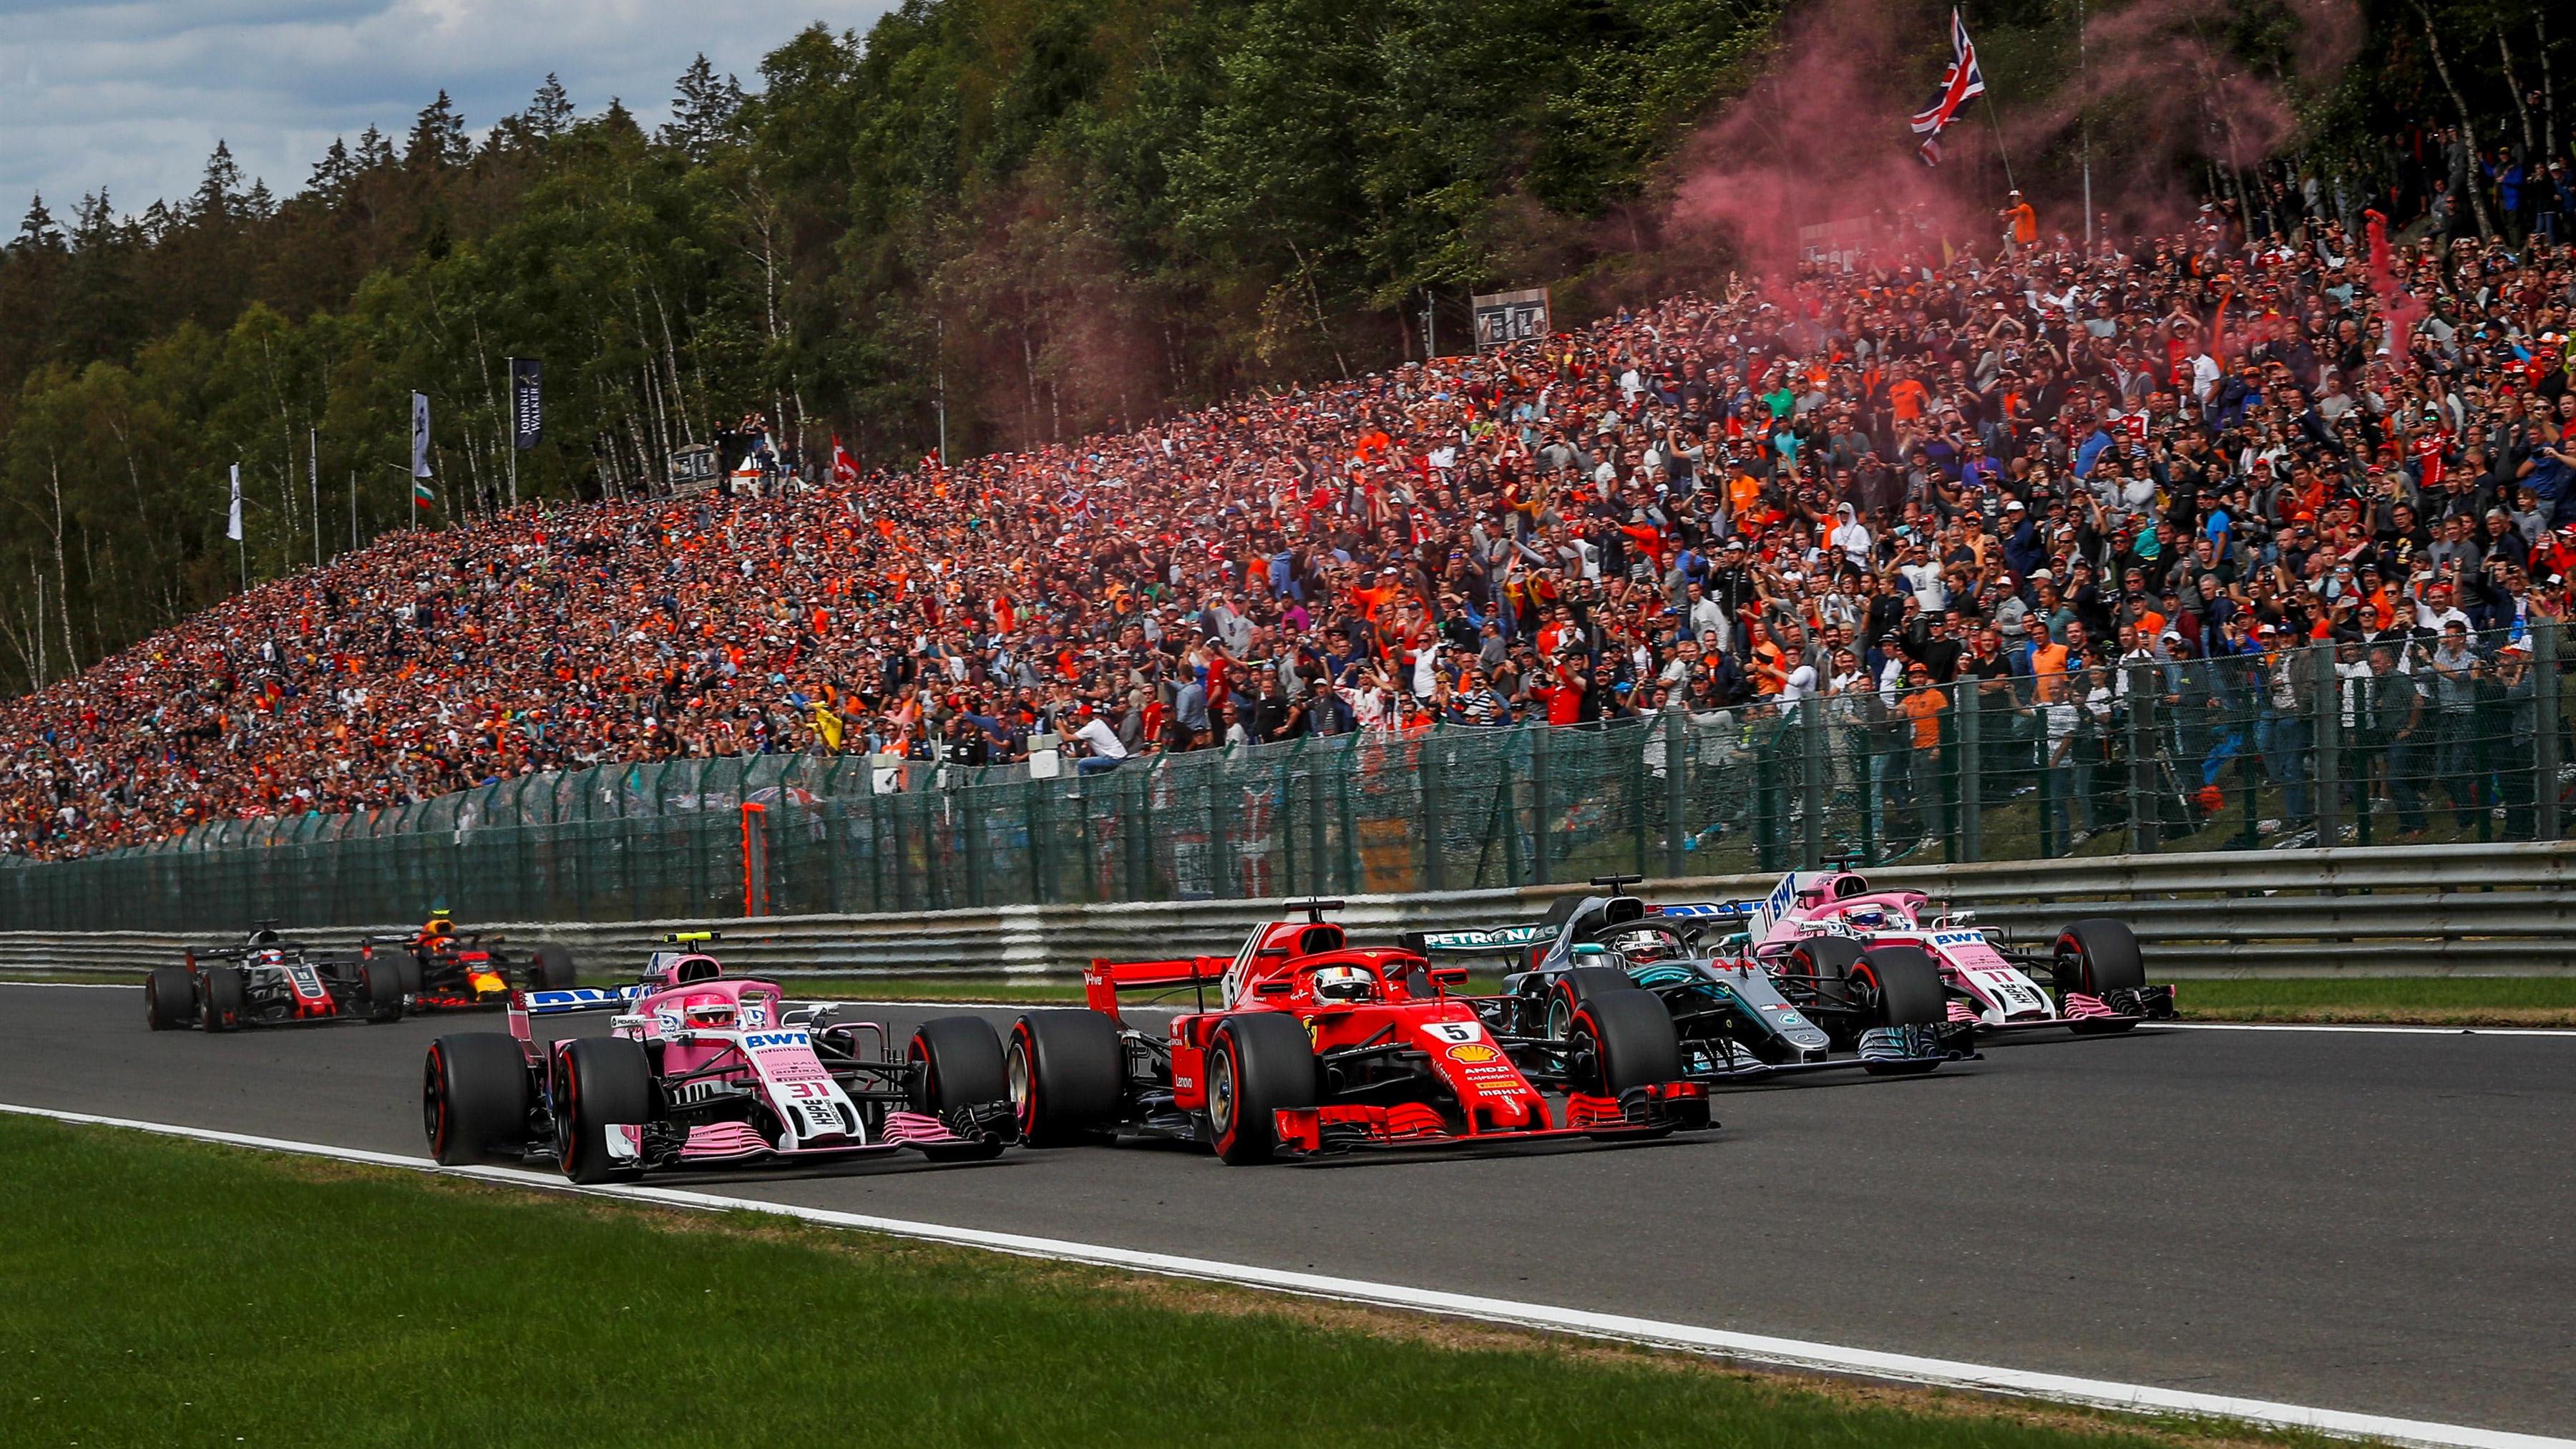 Force India claim 18 points after almost perfect Spa weekend